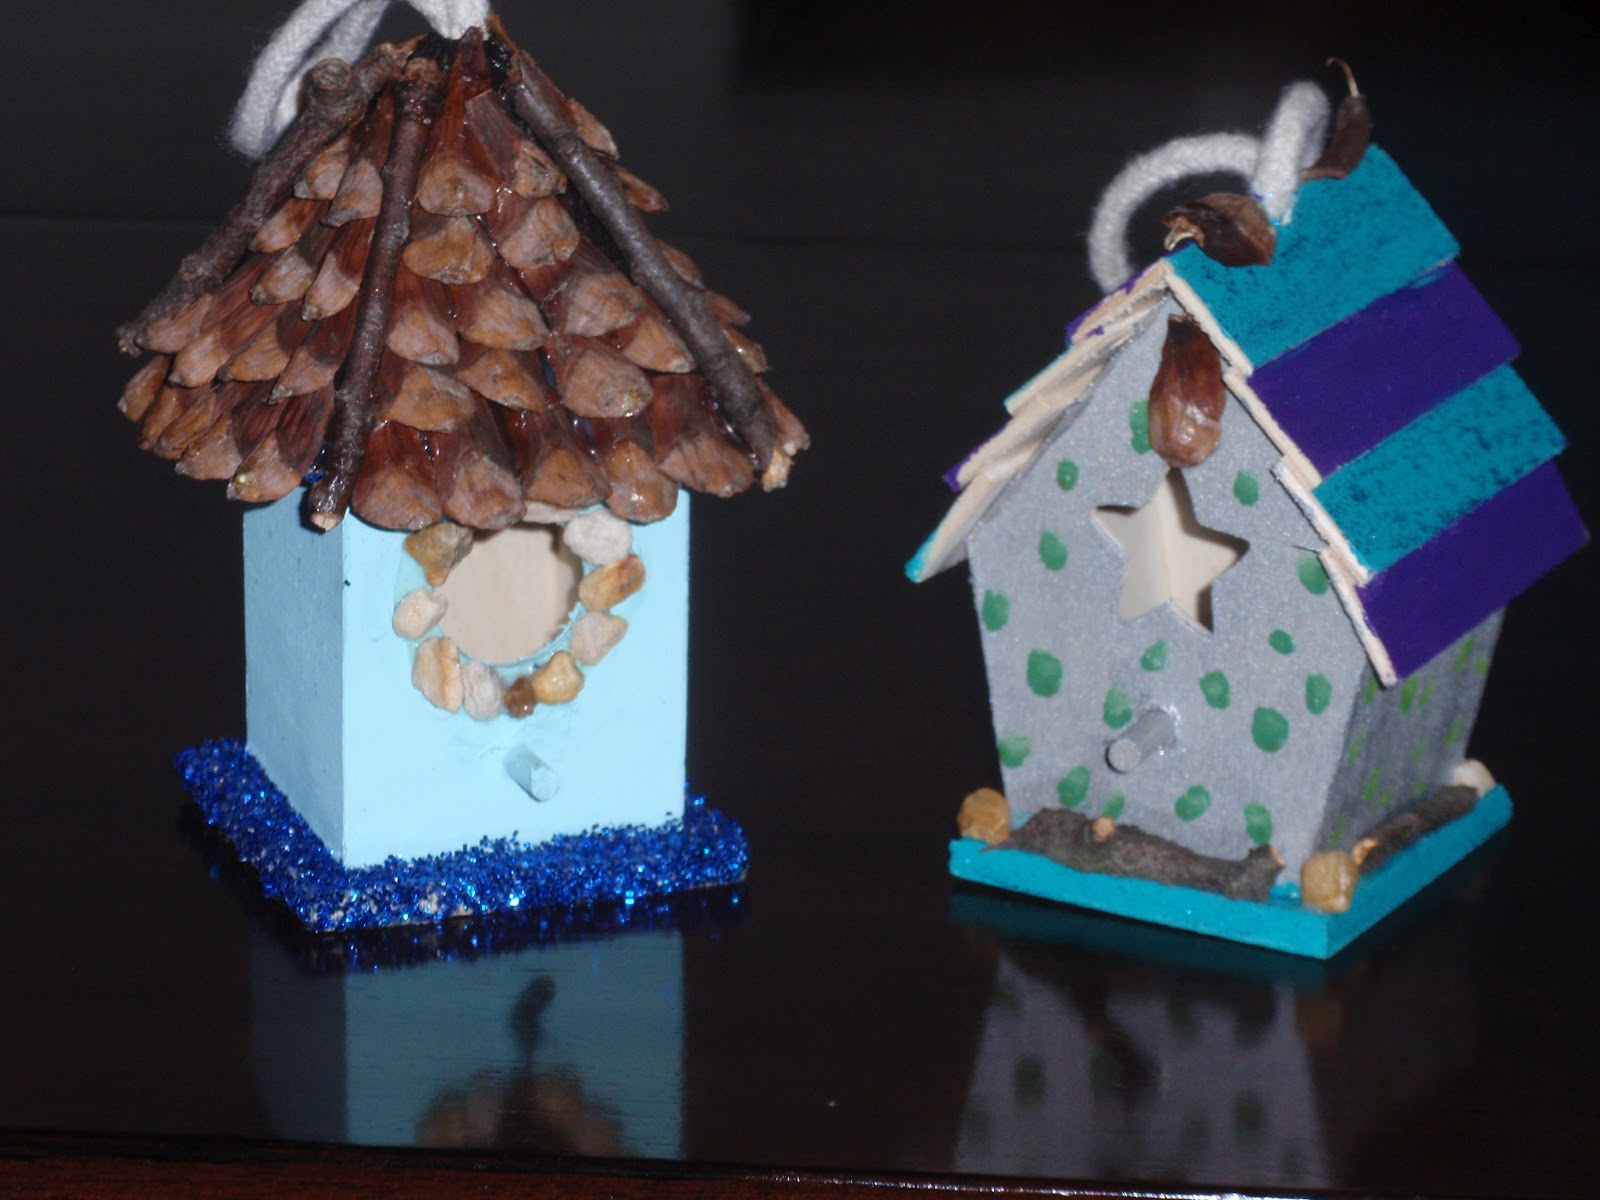 Theresa S Mixed Nuts Diy Decorating Small Bird Houses With